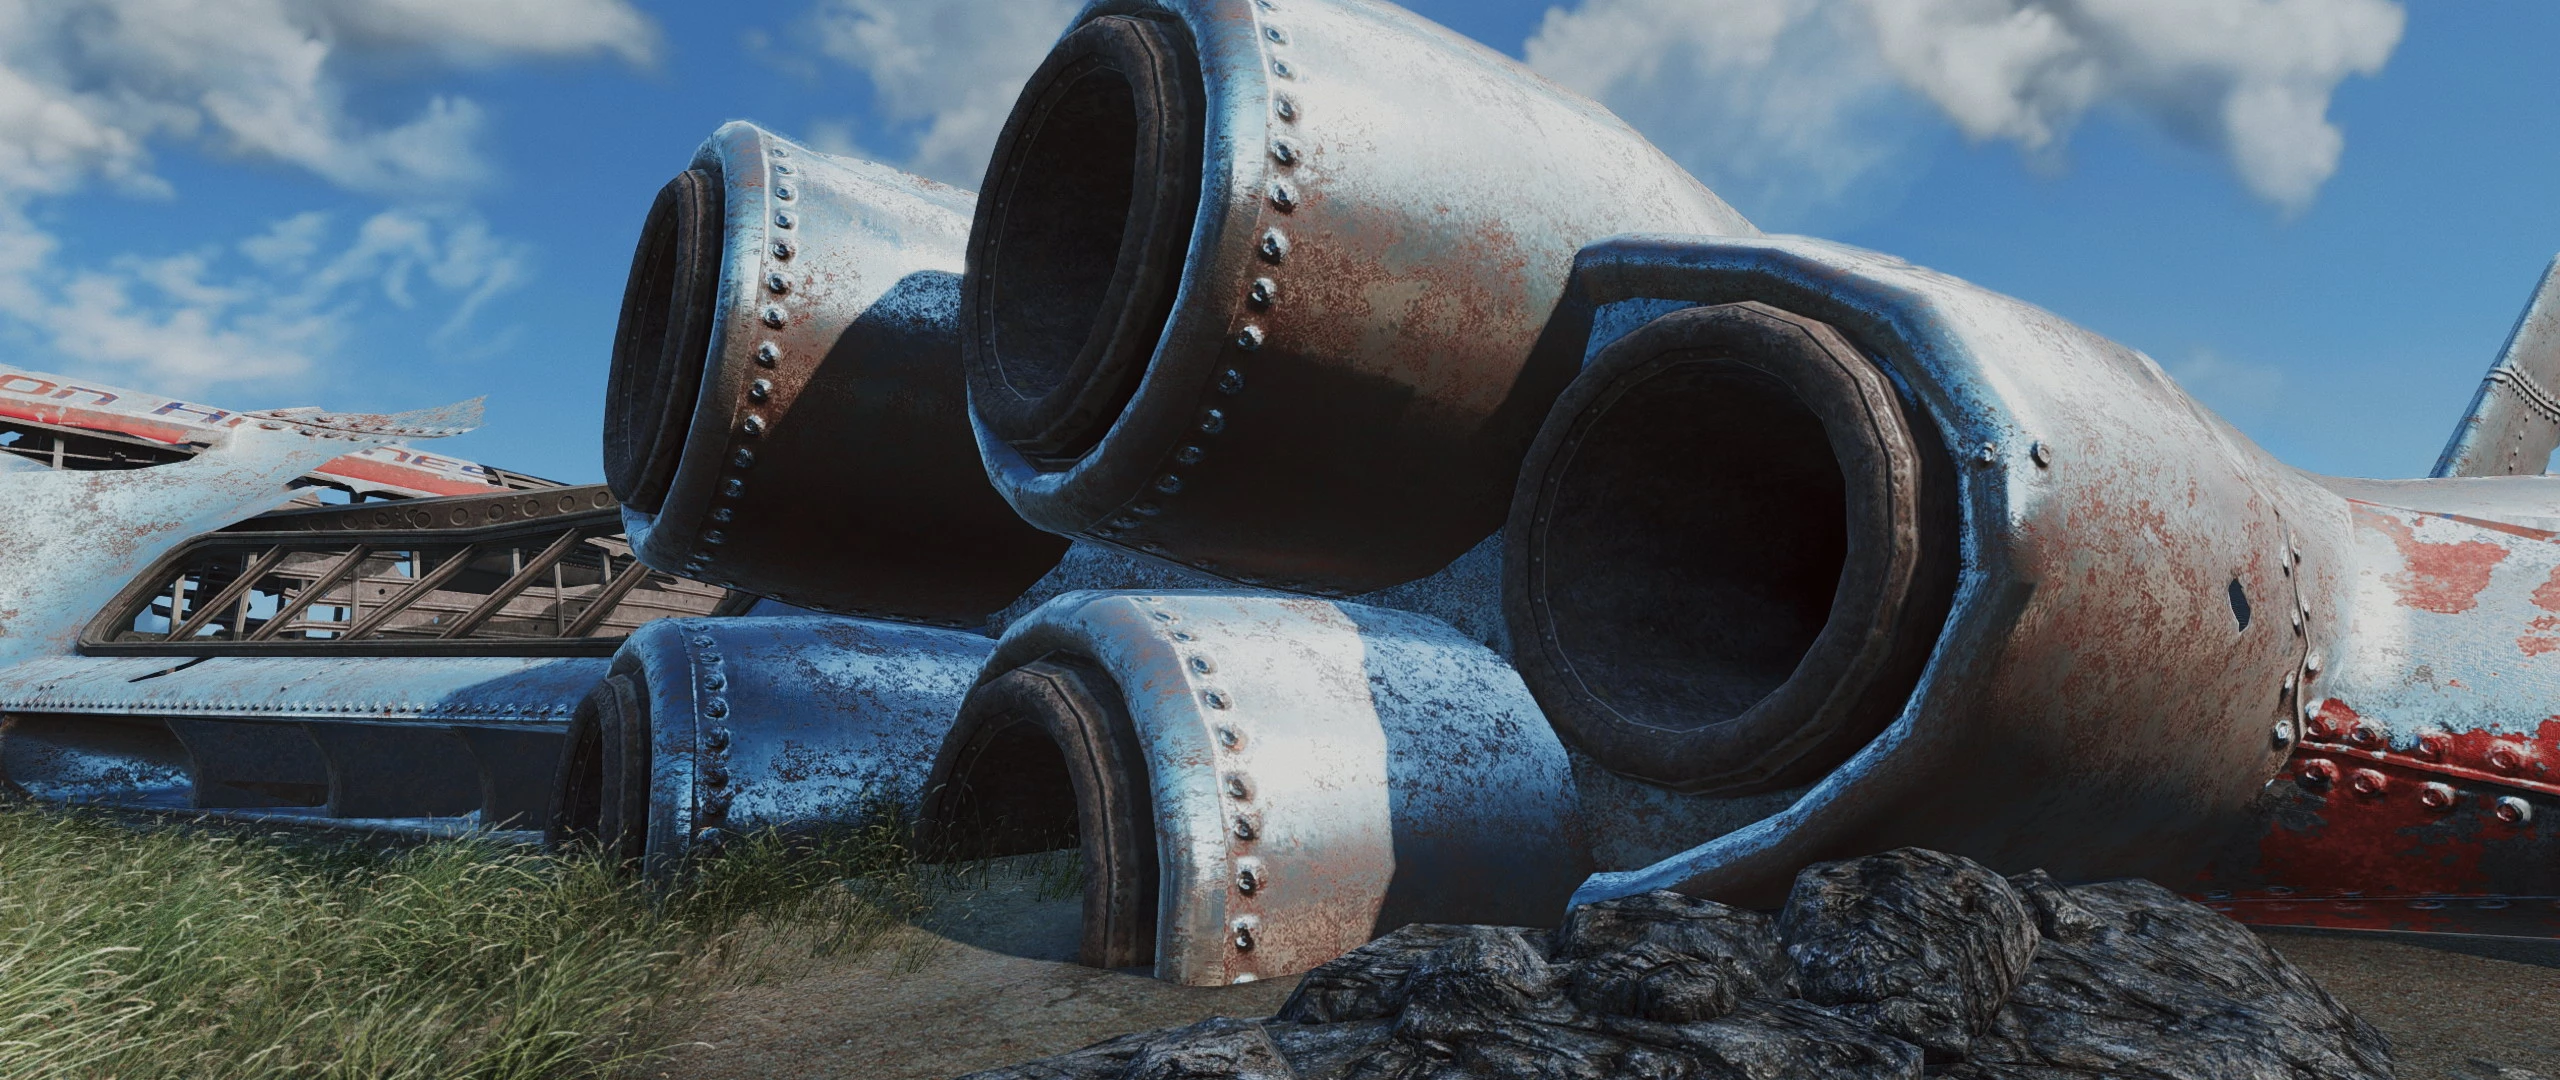 Fallout 4 texture pack фото 60